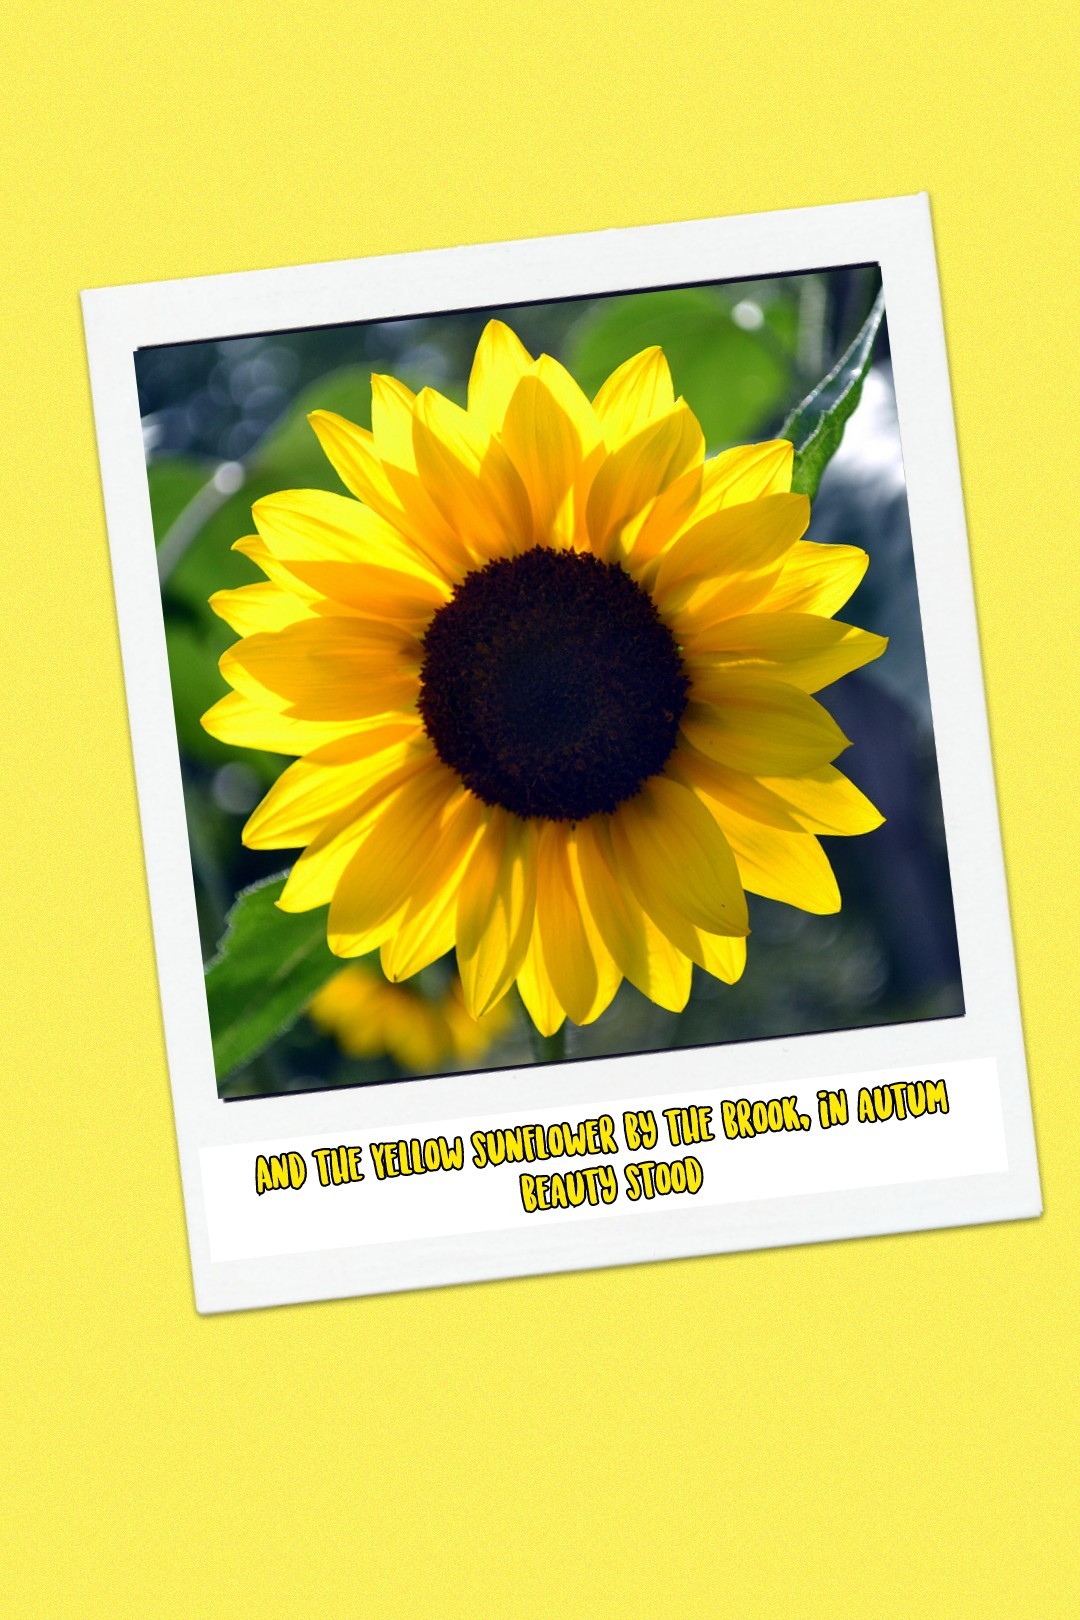 And the Yellow sunflower by the brook, in autum beauty stood.
i was inspired by a perosm who adored these sunflowers and so i thought why not make one repersenting sunflowers and added extra detail with a beautiful quote😊